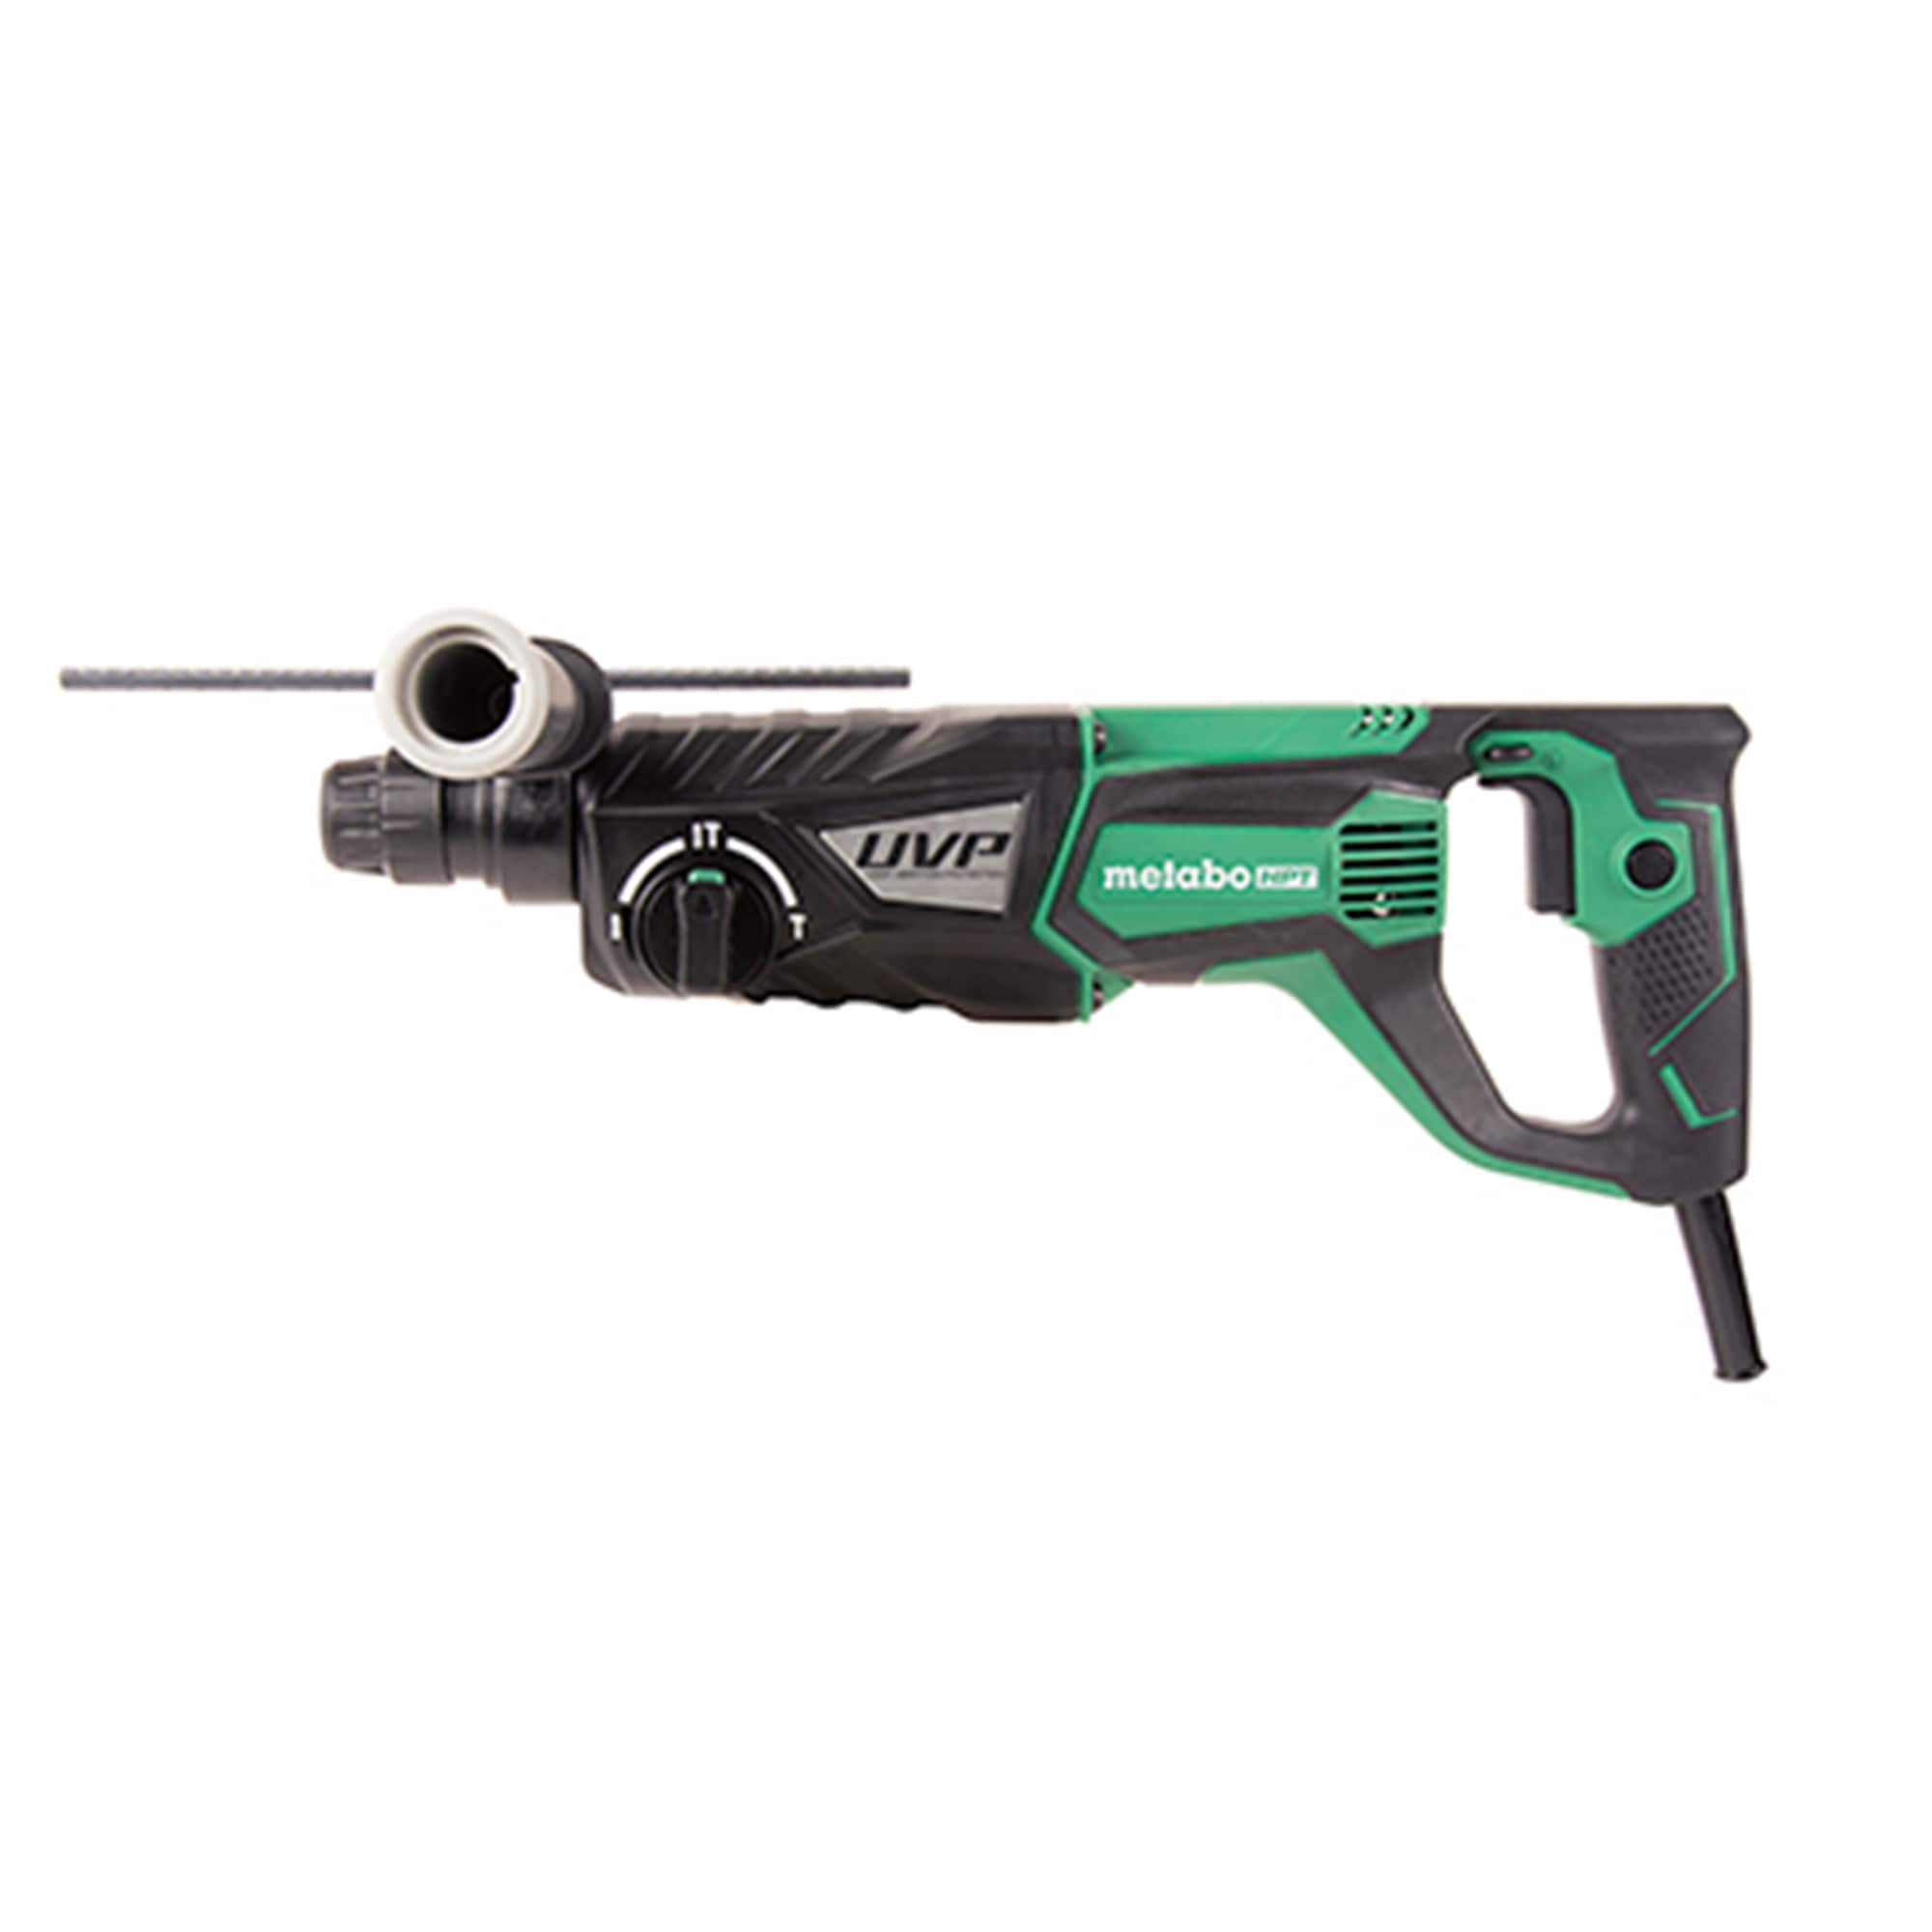 Metabo HPT 8-Amp 1-1/8-in Sds-plus Corded Rotary Hammer Drill in